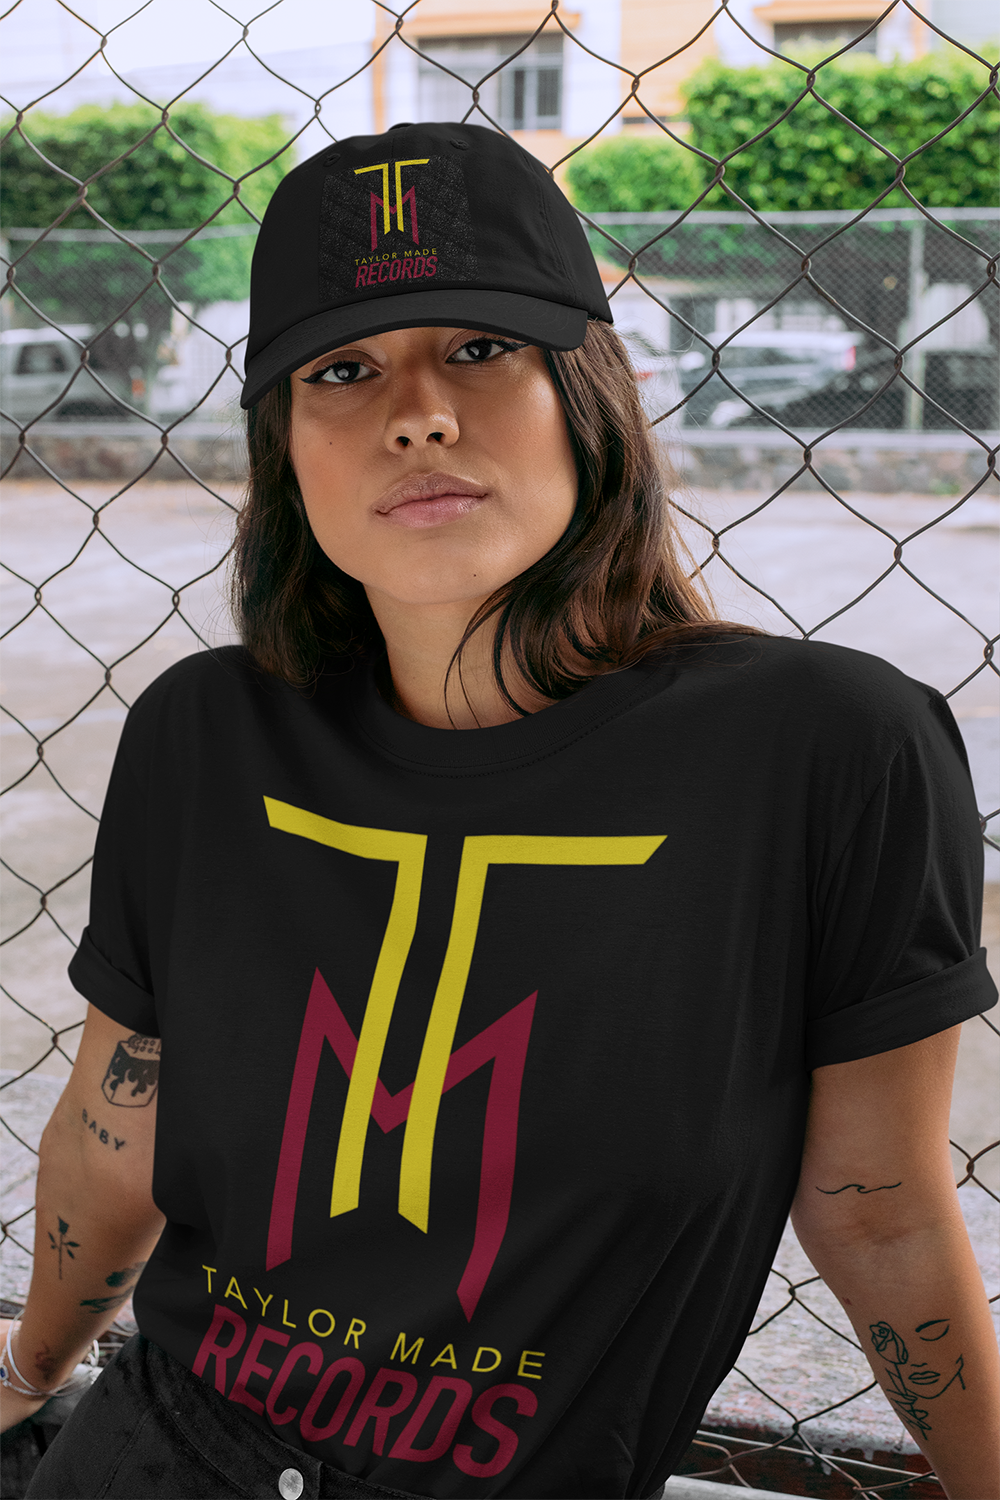 t-shirt-mockup-featuring-a-woman-wearing-a-dad-hat-by-a-chain-link-fence-28600.png